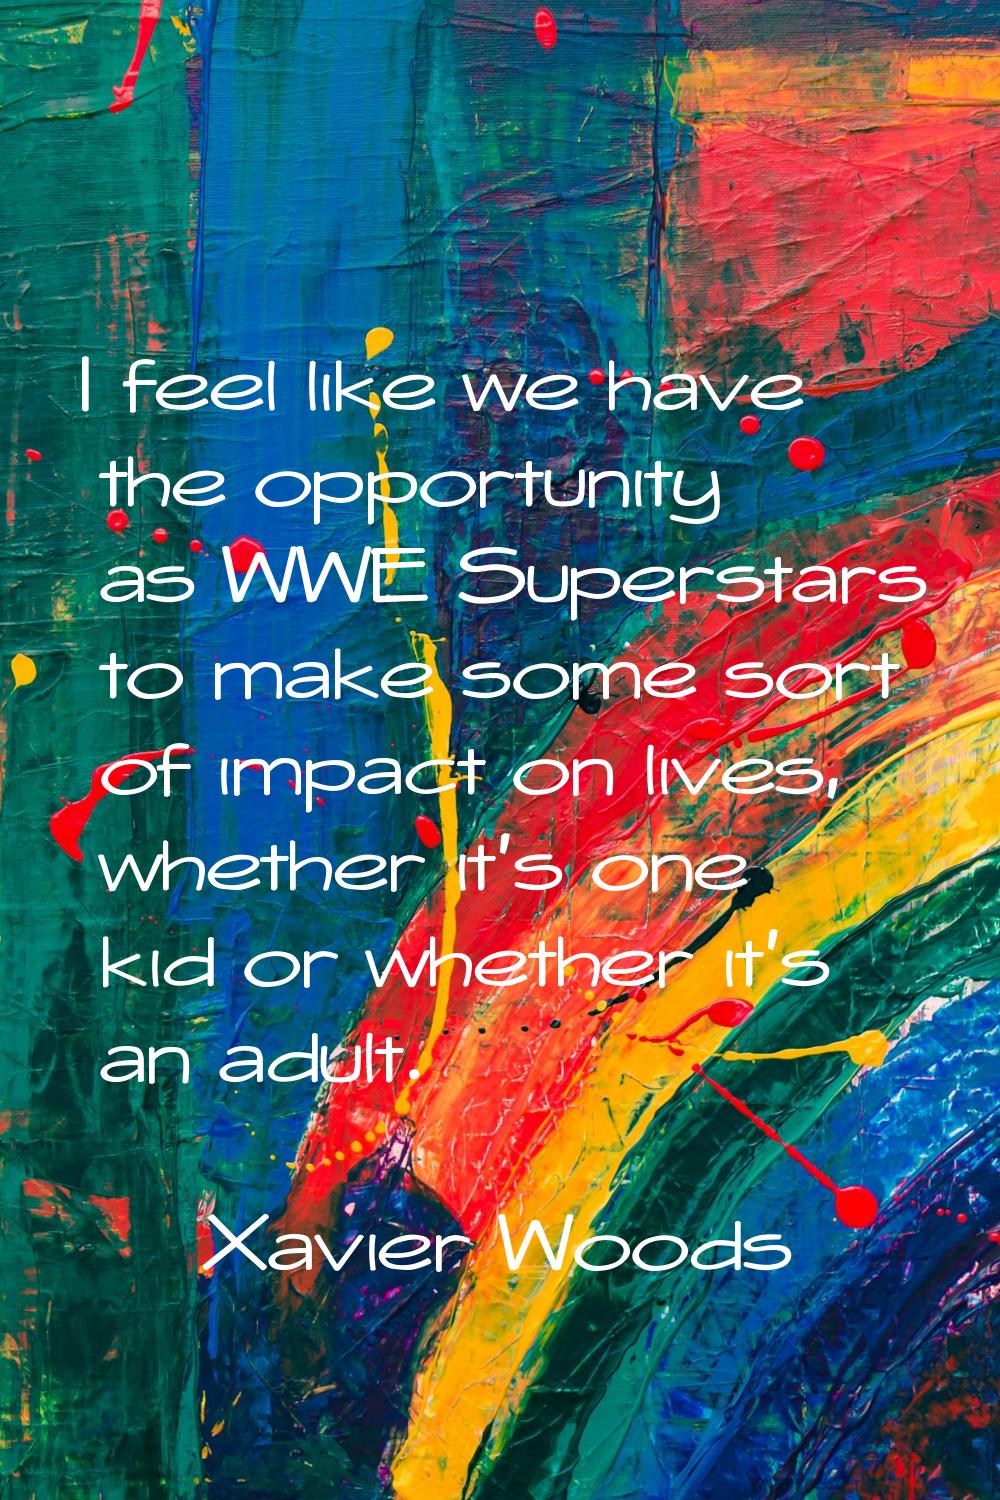 I feel like we have the opportunity as WWE Superstars to make some sort of impact on lives, whether